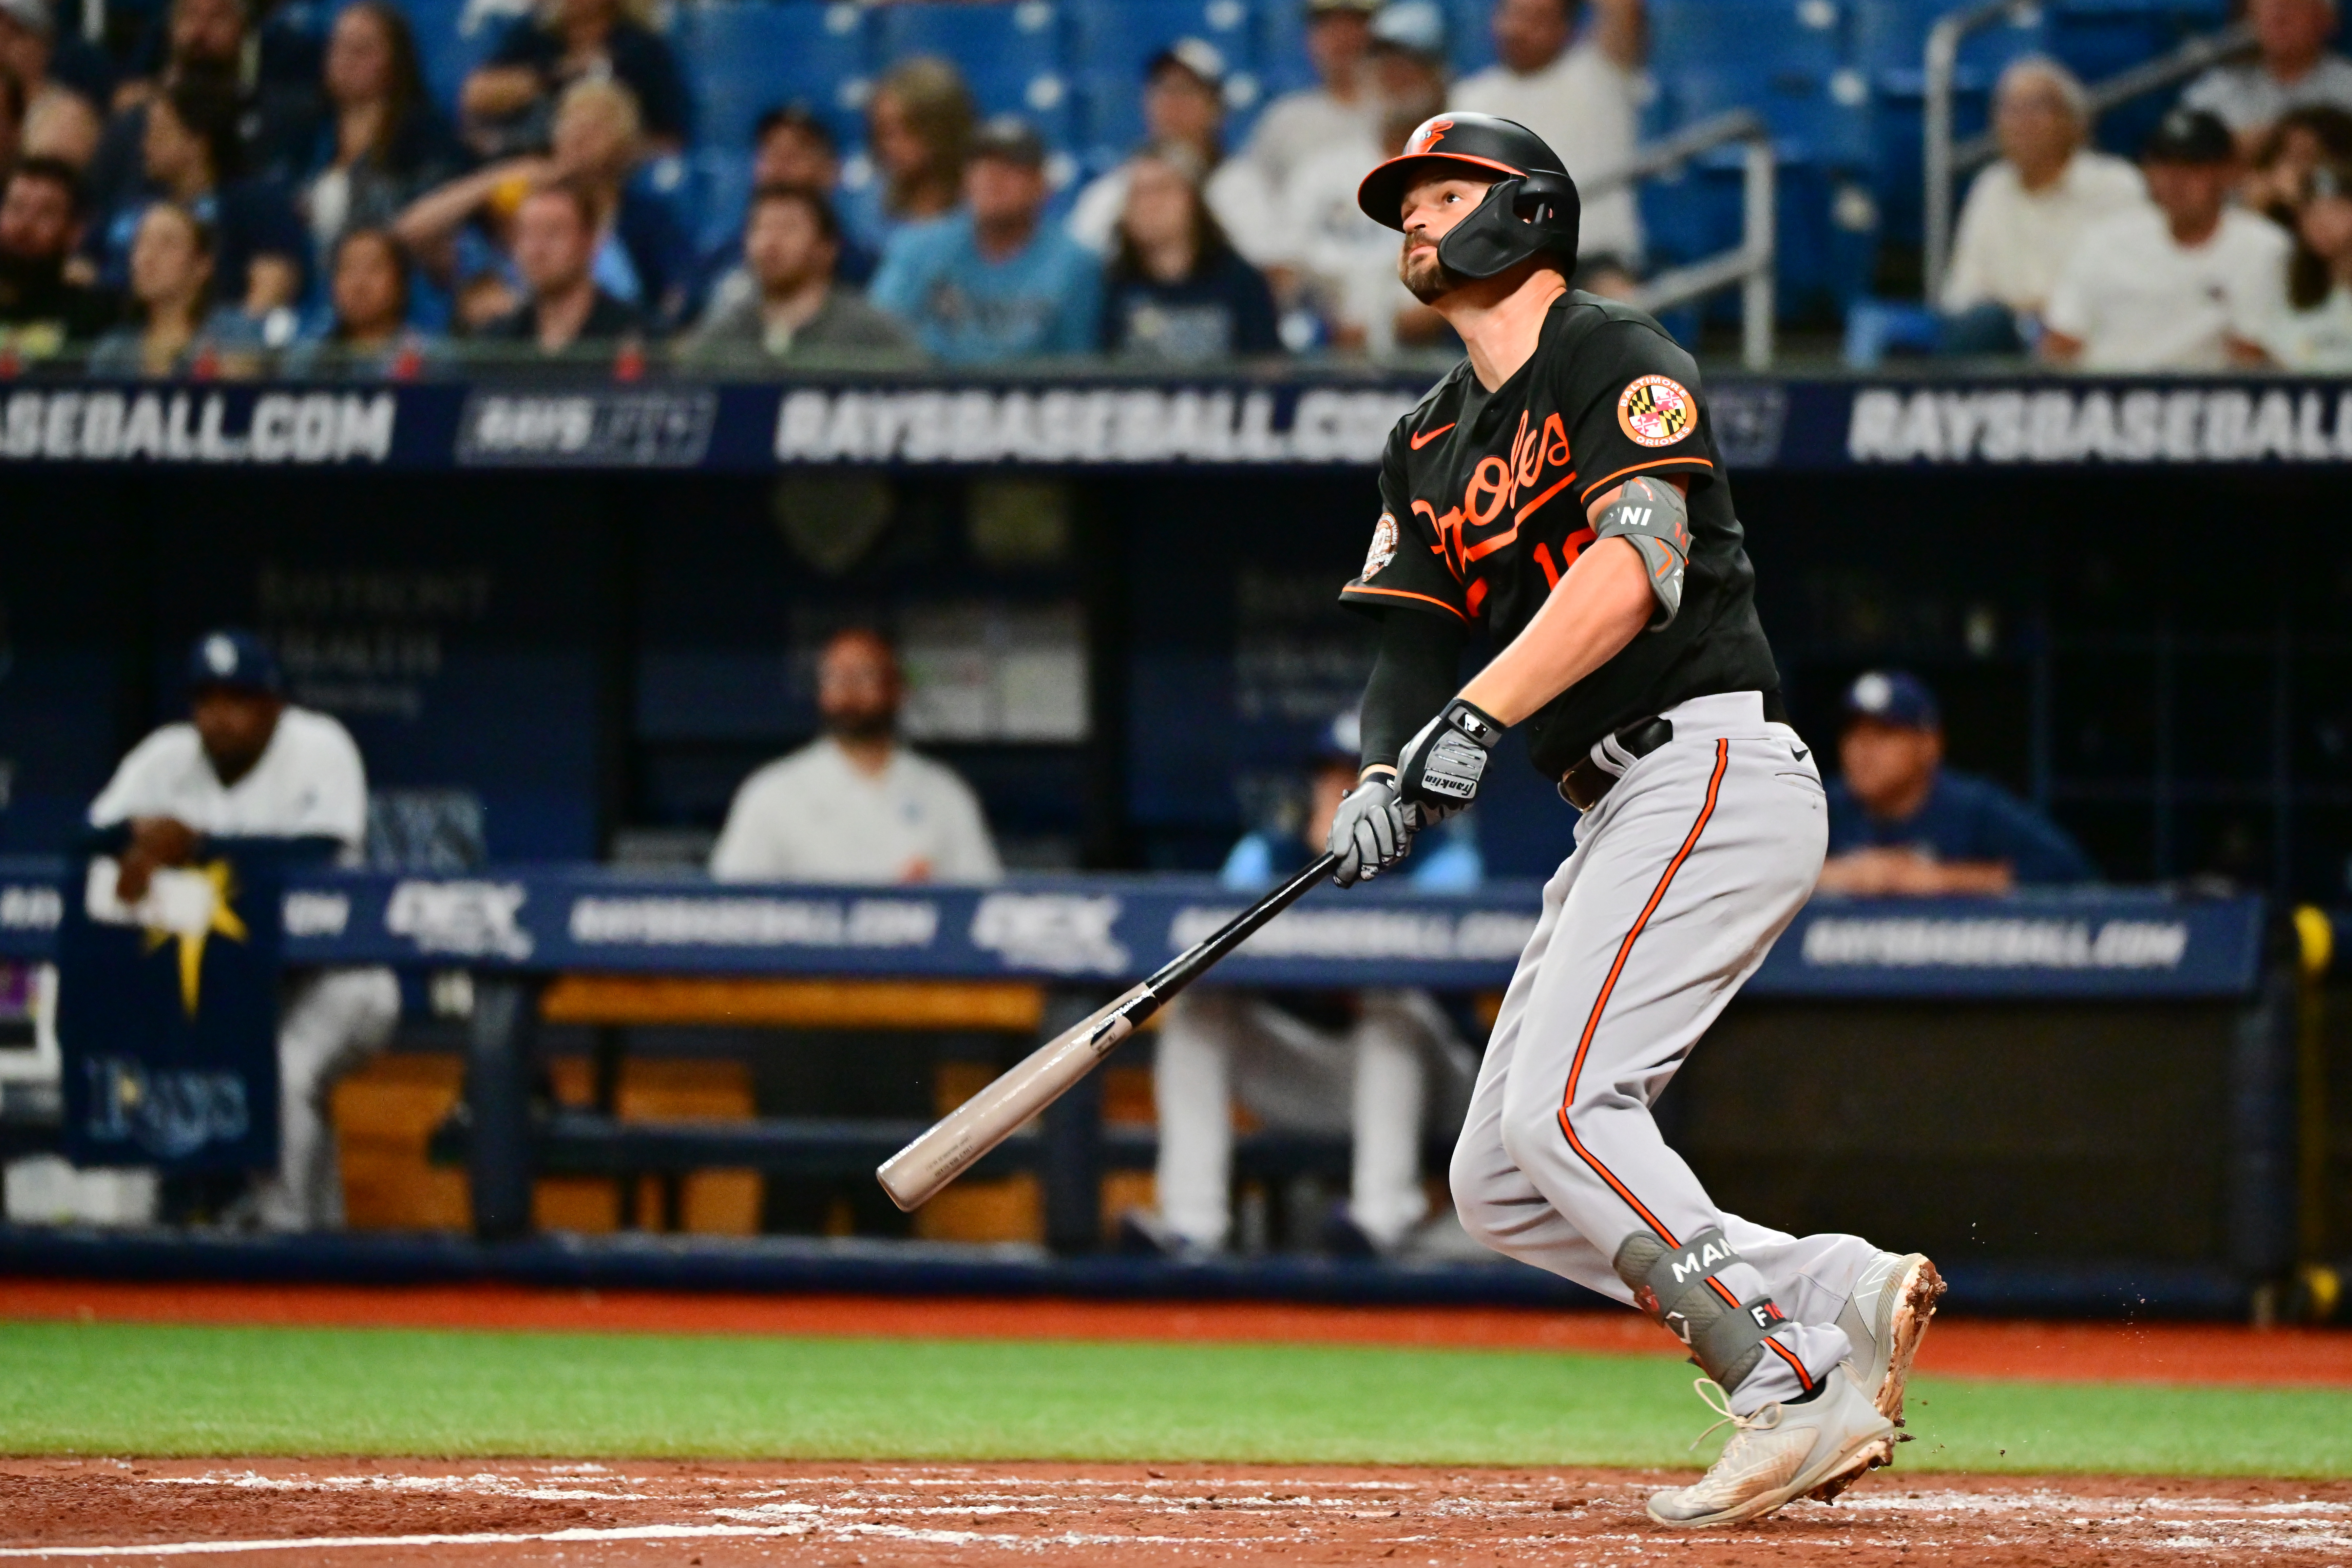 Trey Mancini To Red Sox? Why Trade For Orioles Hitter Makes Sense